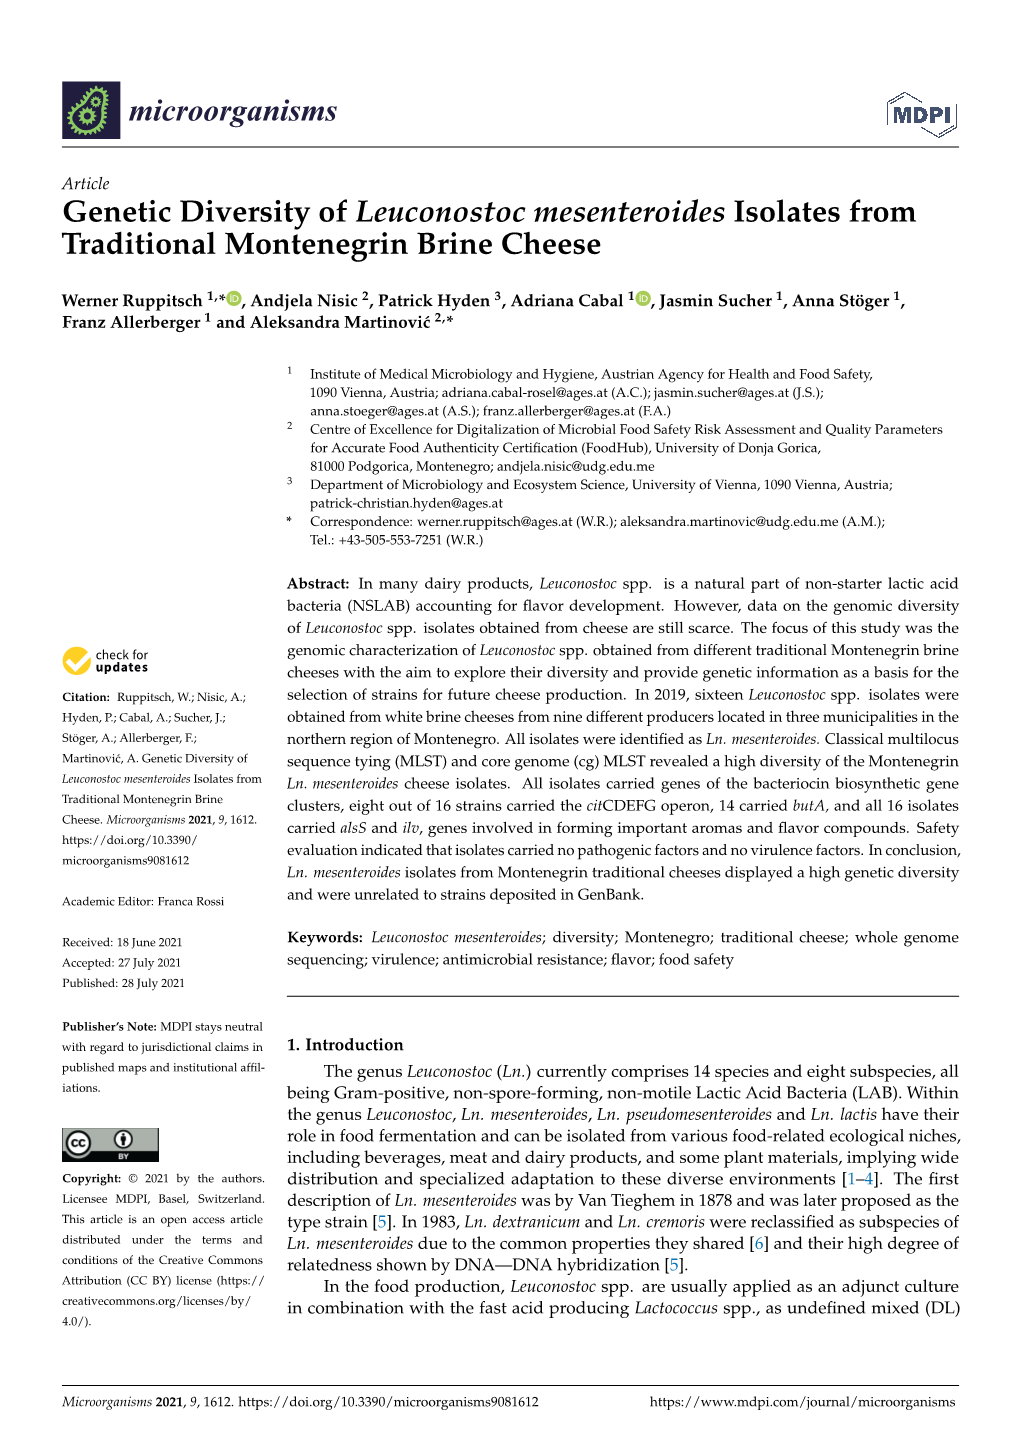 Genetic Diversity of Leuconostoc Mesenteroides Isolates from Traditional Montenegrin Brine Cheese